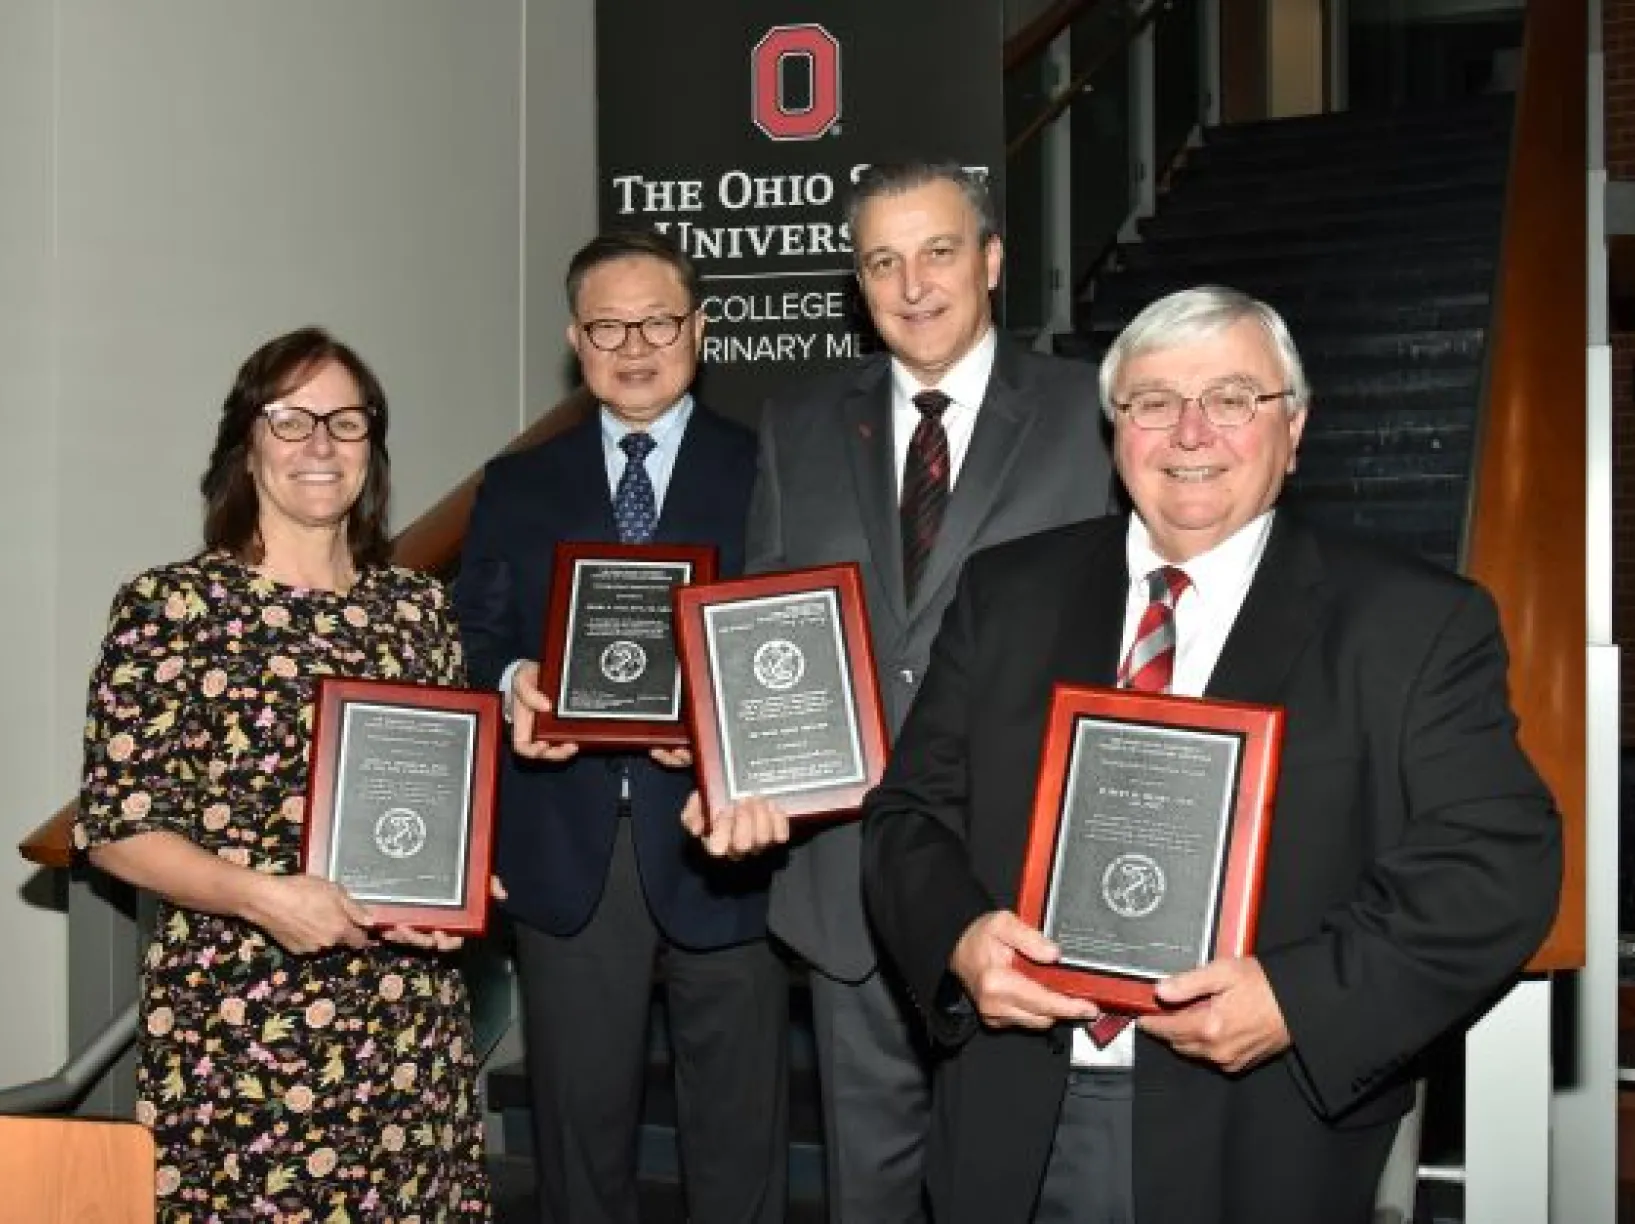 Four people receiving awards from The Ohio State University College of Veterinary Medicine